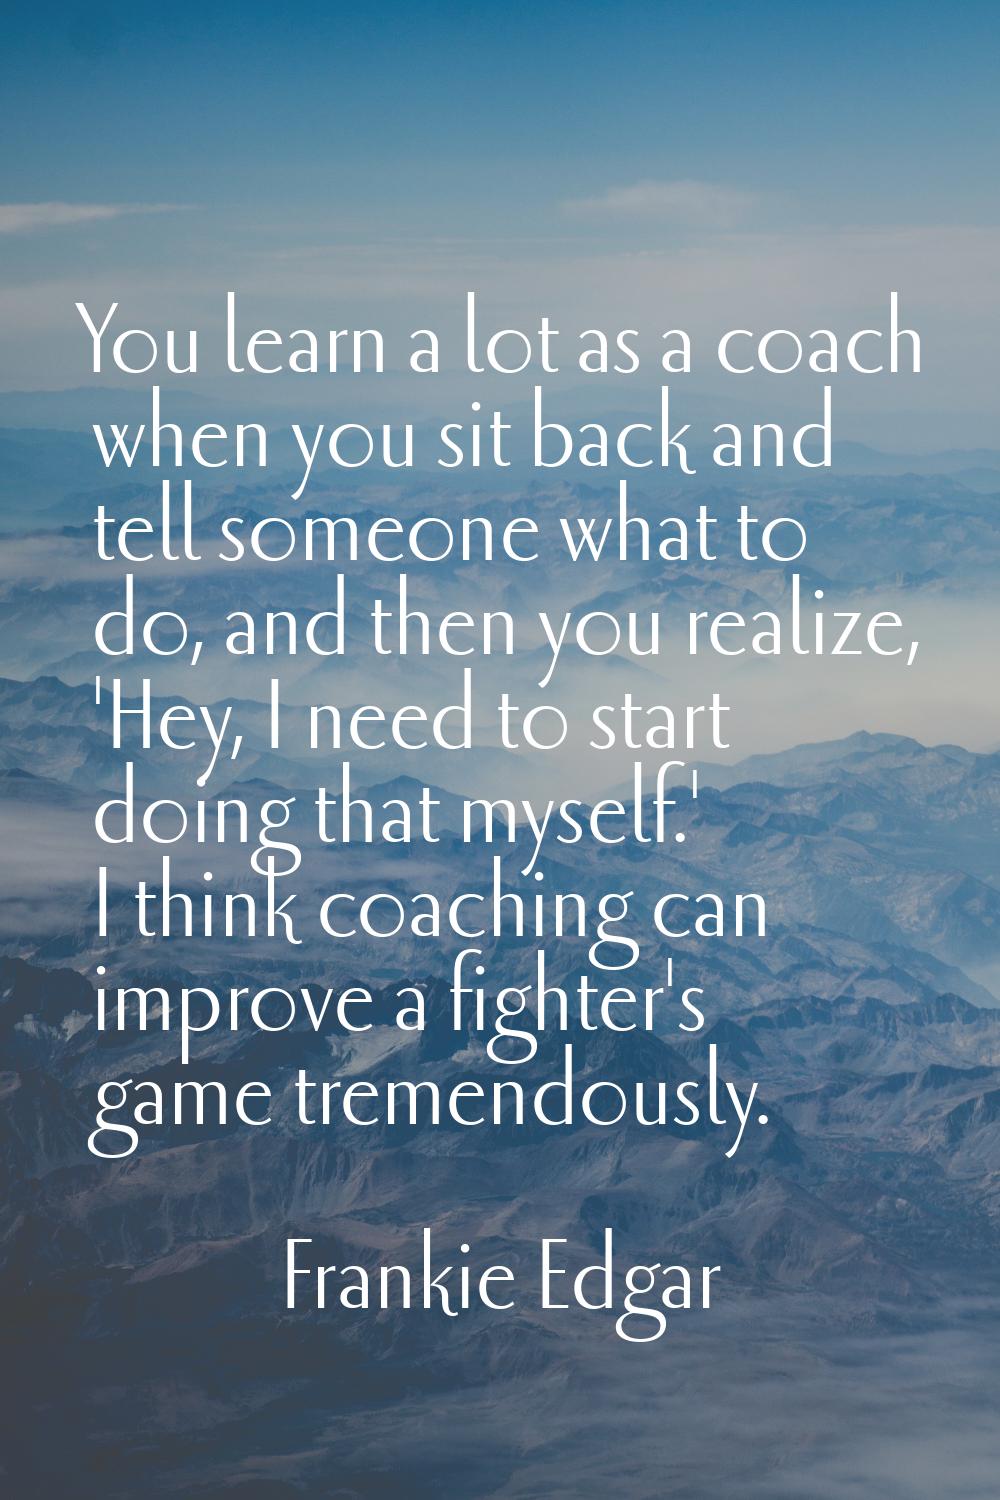 You learn a lot as a coach when you sit back and tell someone what to do, and then you realize, 'He